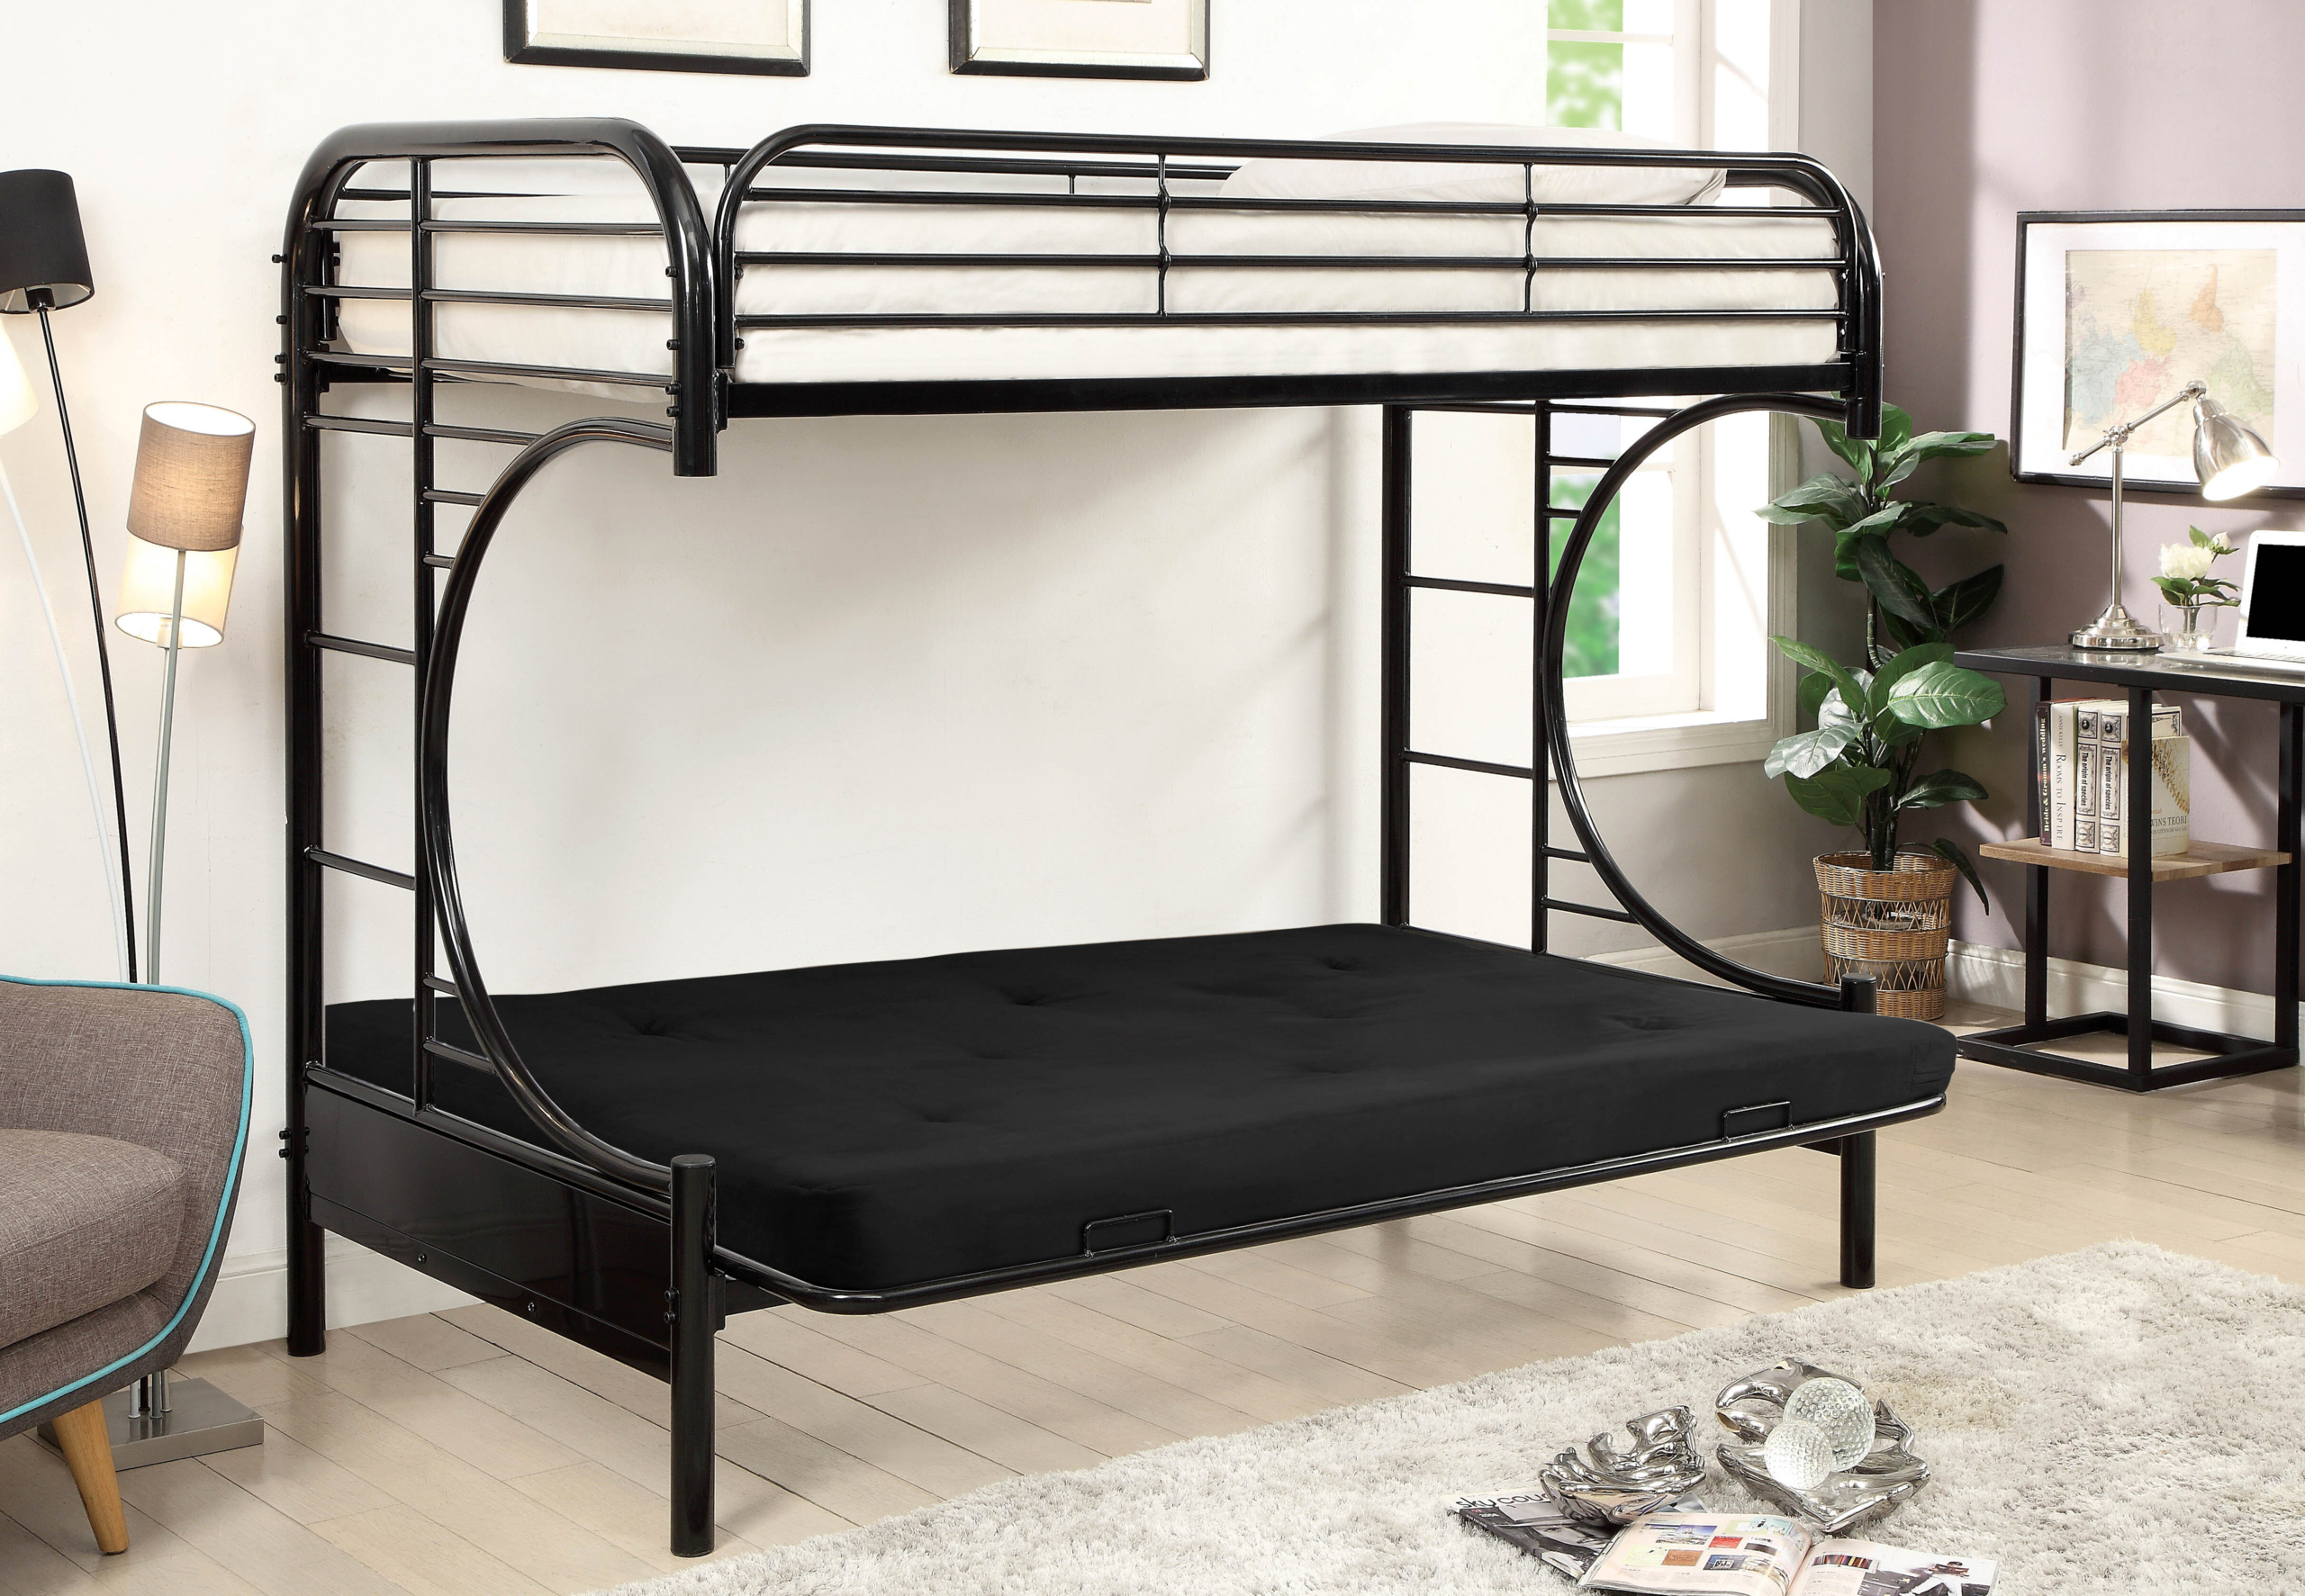 Full Over Futon Bunk Bed Visualhunt, A Futon Bunk Bed